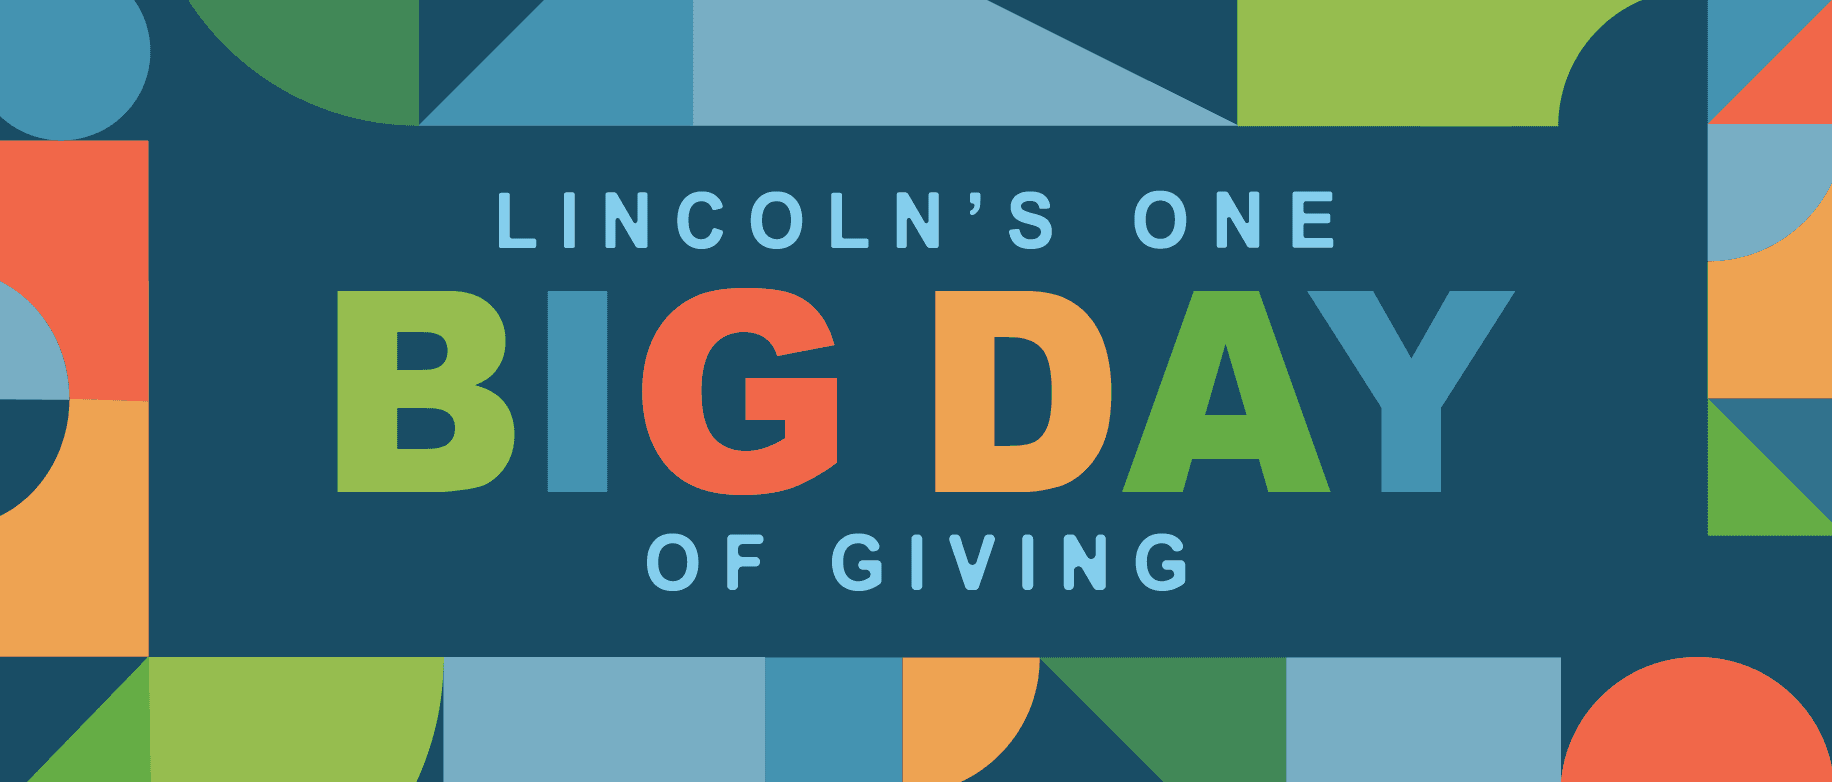 Give to Lincoln Day 2024